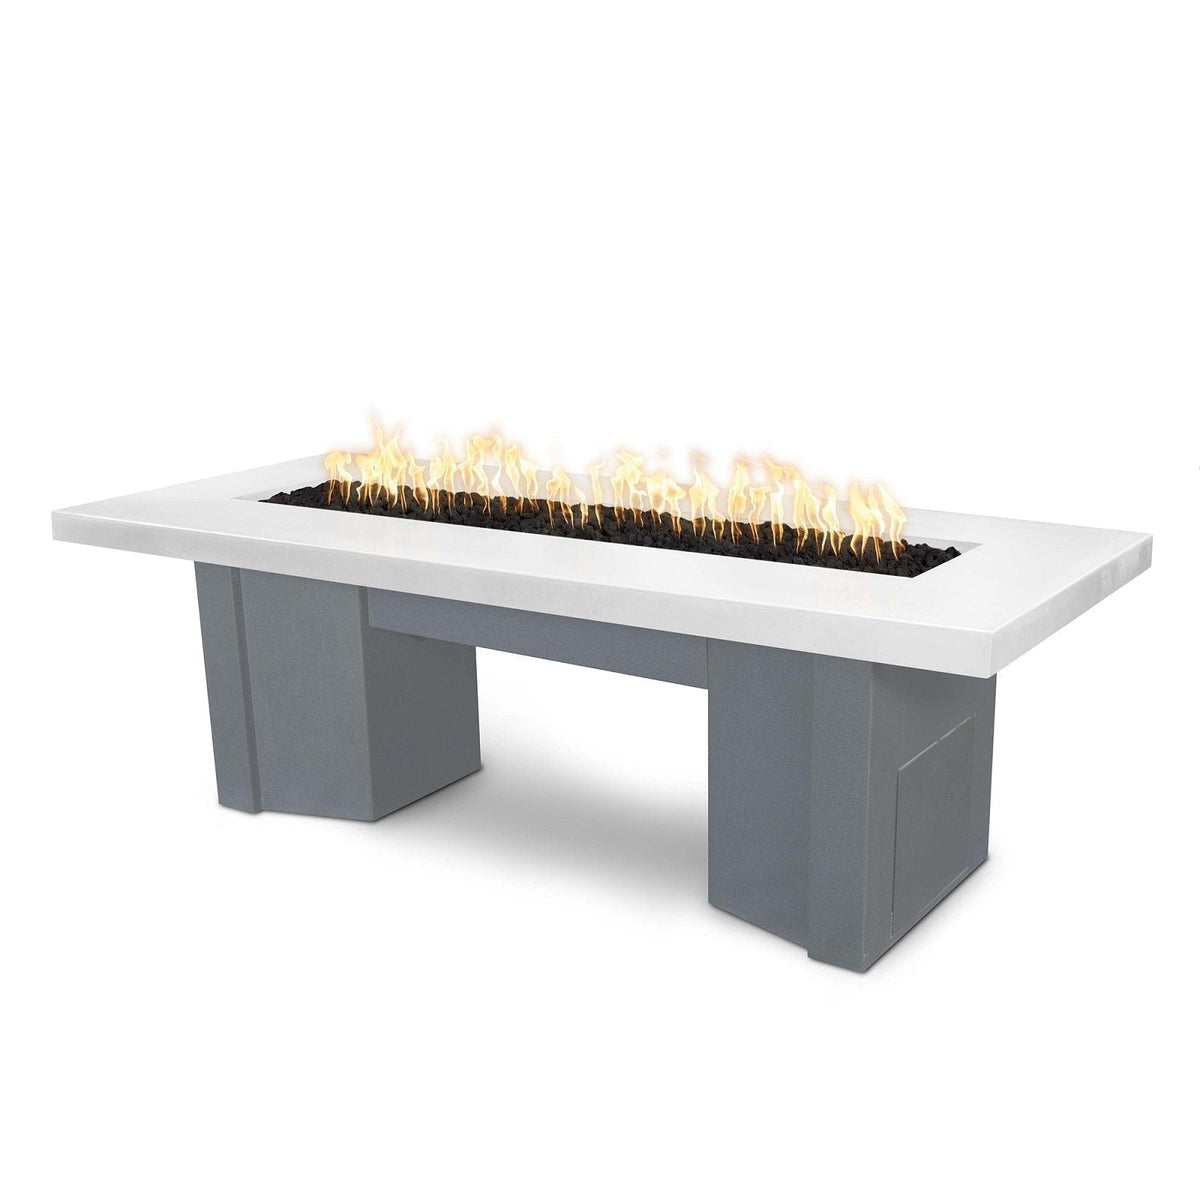 The Outdoor Plus Fire Features Limestone (-LIM) / Gray Powder Coated Steel (-GRY) The Outdoor Plus 78&quot; Alameda Fire Table Smooth Concrete in Natural Gas - Flame Sense System with Push Button Spark Igniter / OPT-ALMGFRC78FSEN-NG